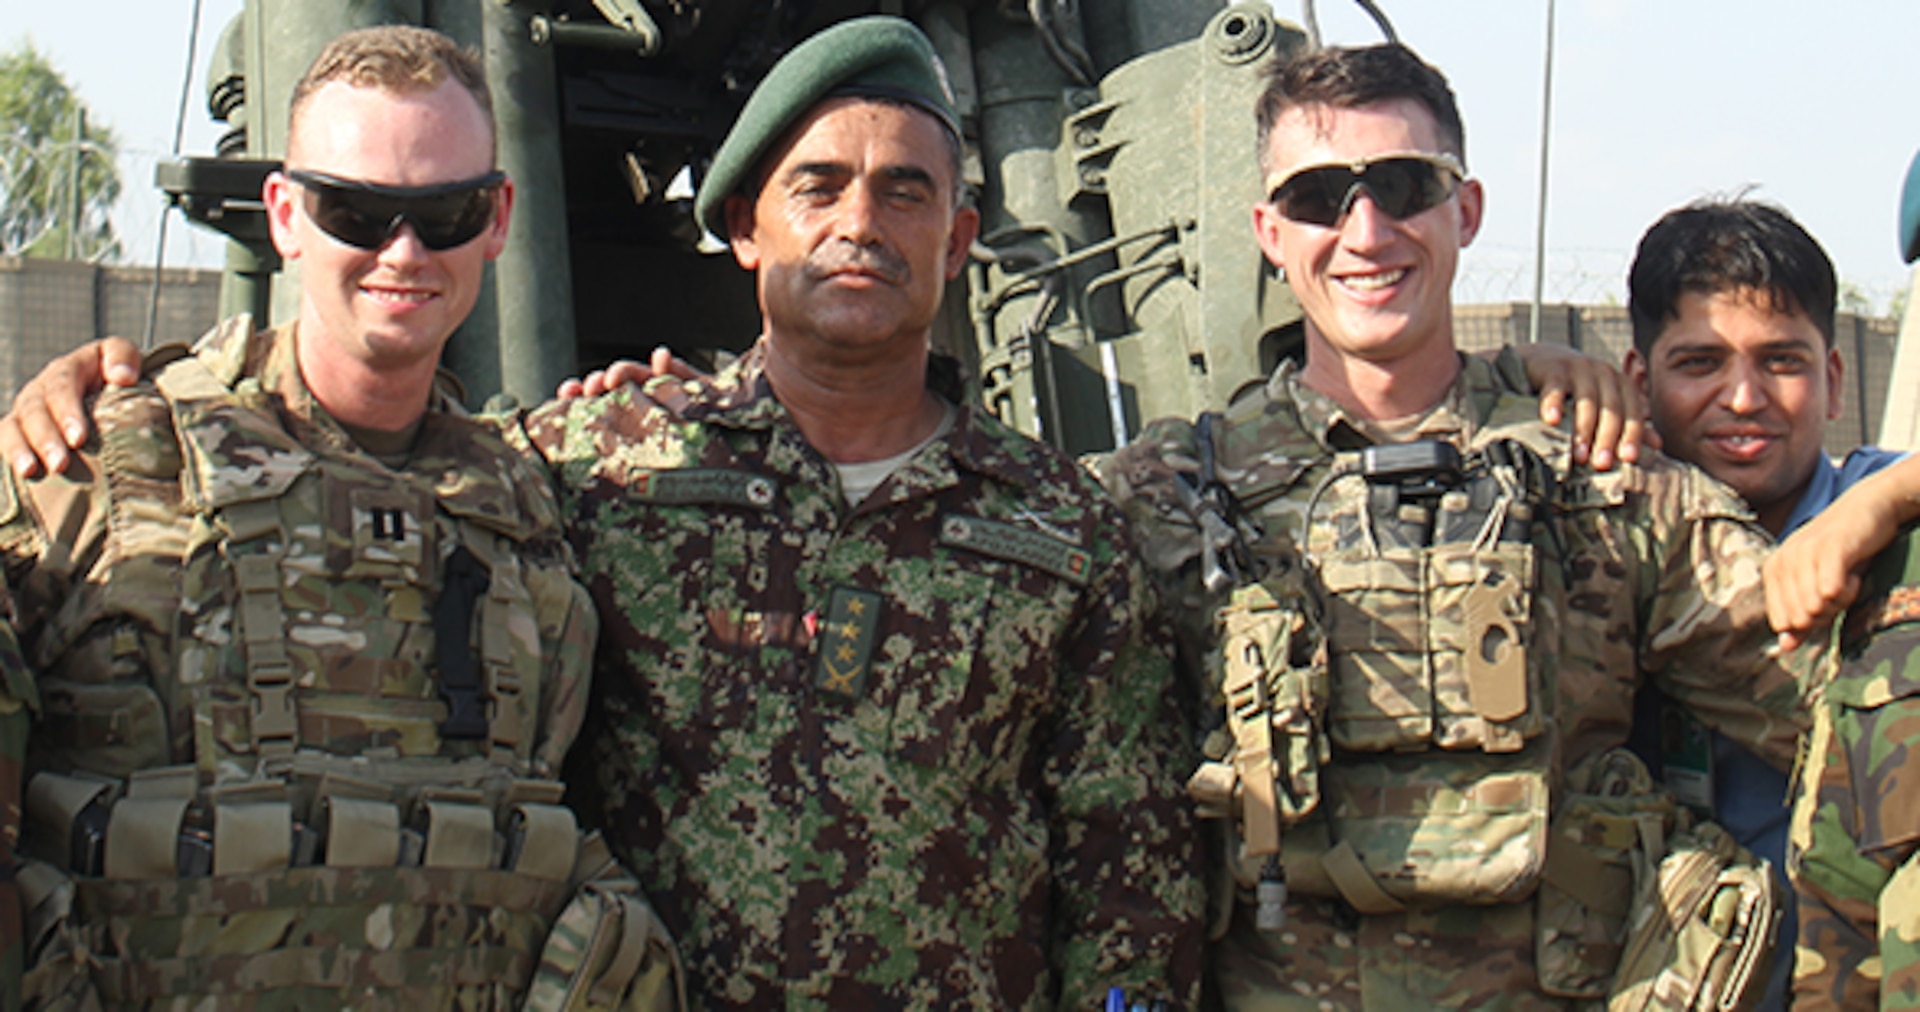 Capt. Dennis M. Kelly, a fire support advisor with Train, Advise, Assist Command – East takes a moment to pose with Col. Ahmed Jan, fire support officer, 201st Corps. The two have a special bond that's helped lead to especially-effective artillery and air support in Afghanistan's eastern provinces. (U.S. Army Photo by Capt. Grace Geiger)